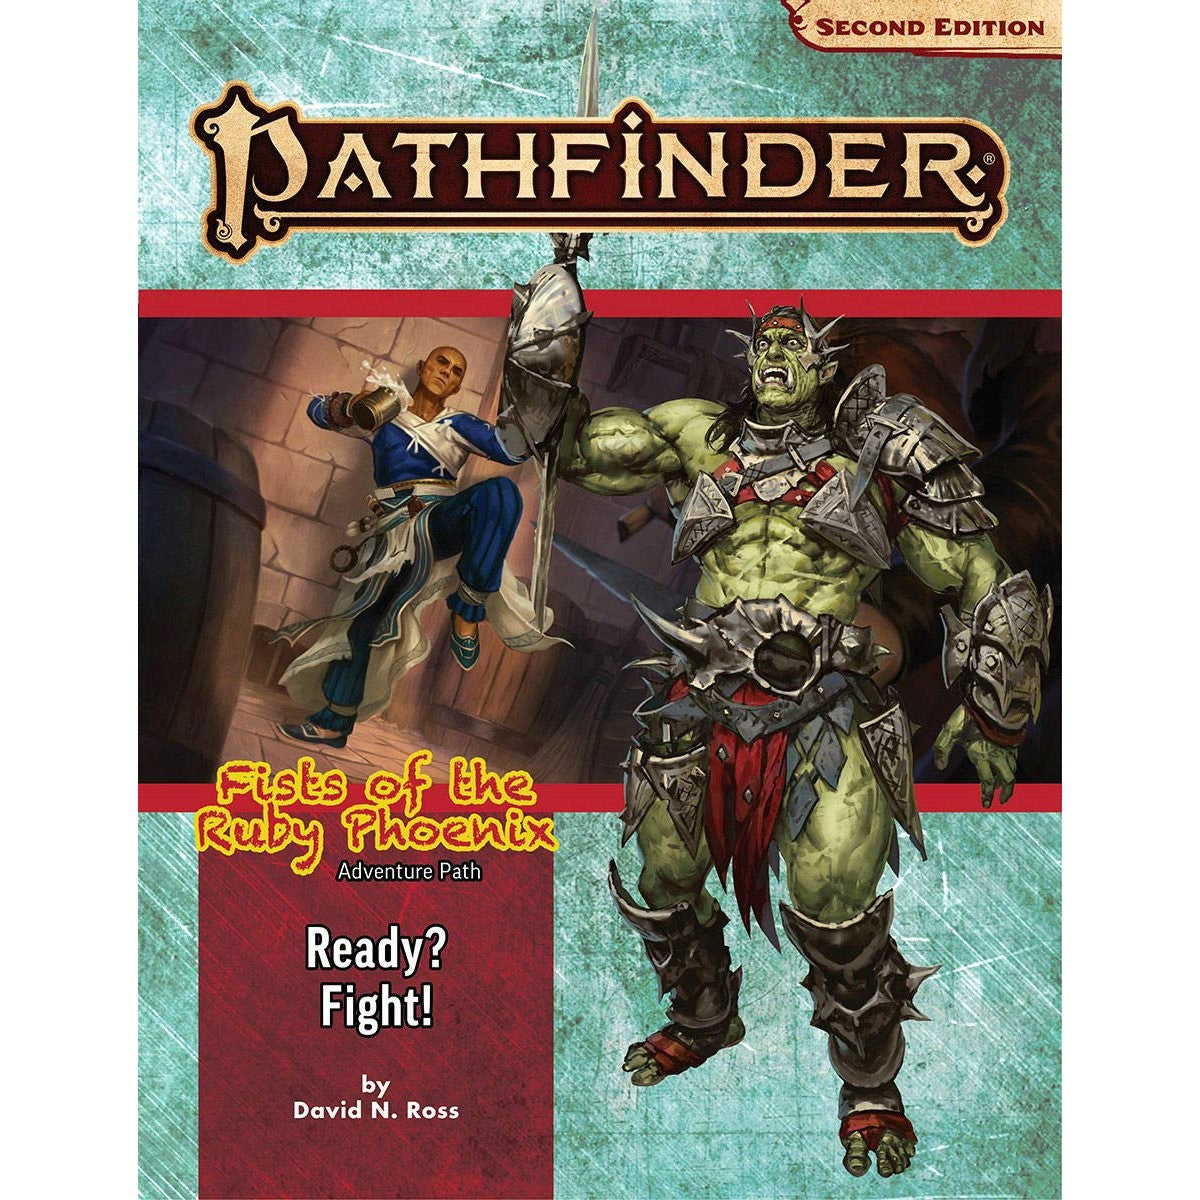 Pathfinder Second Edition Adventure Path Fists of the Ruby Phoenix #2 Ready? Fight!